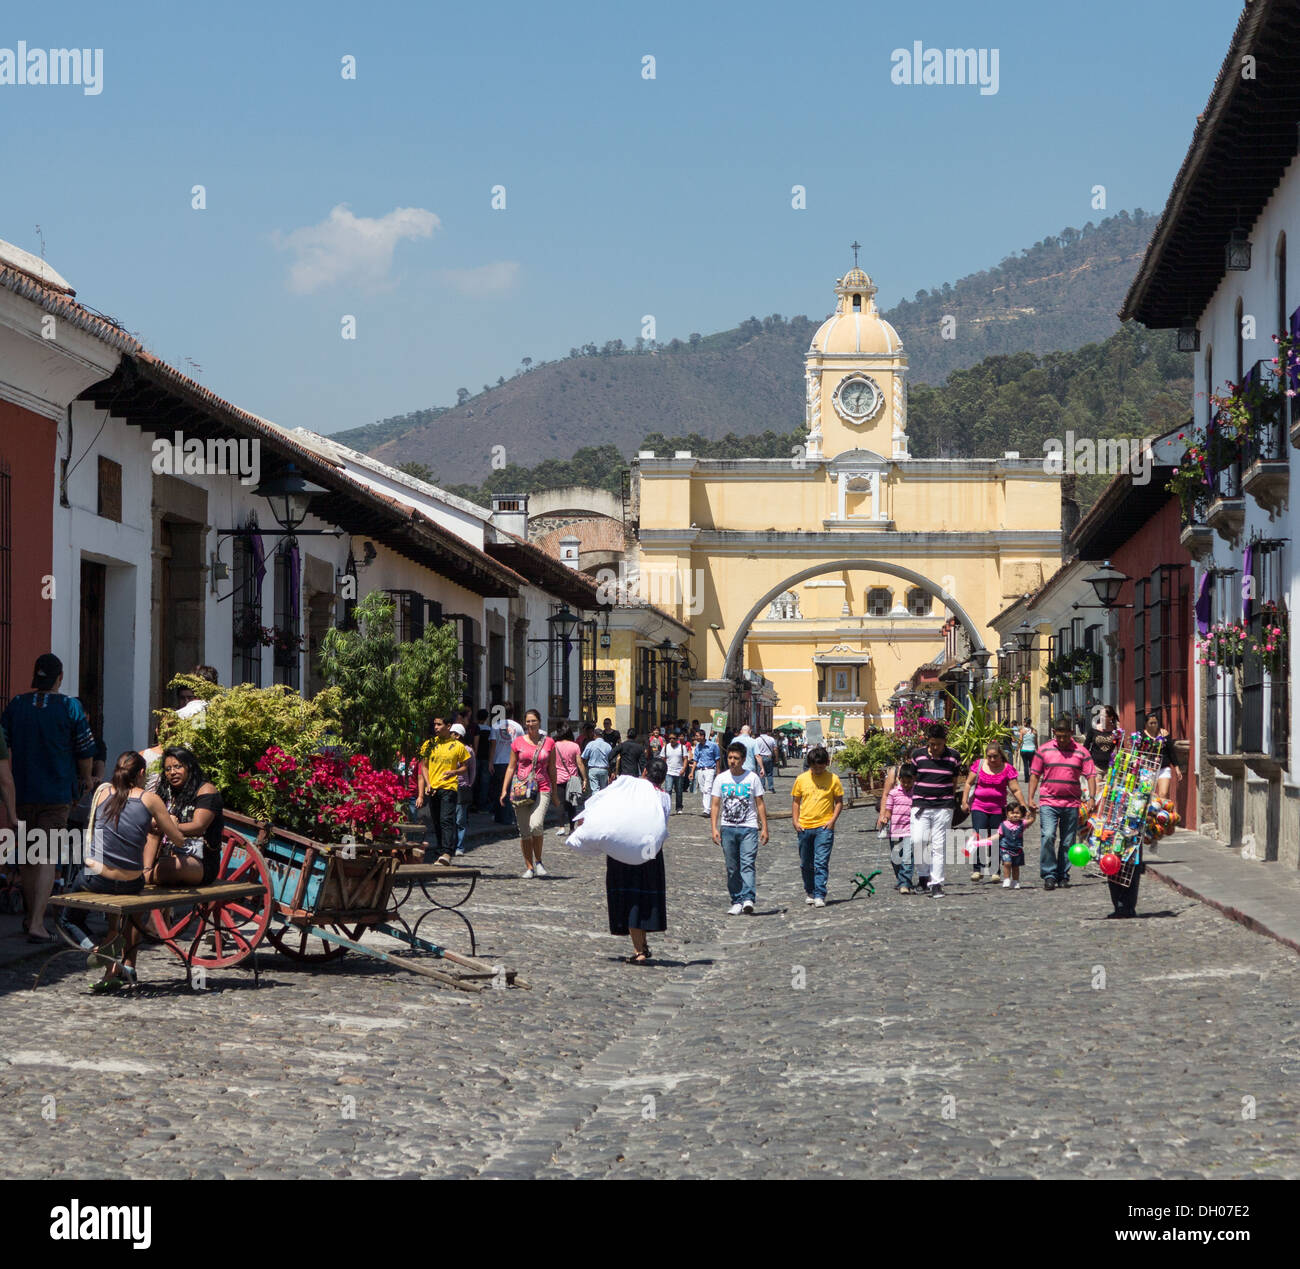 Antigua Guatemala is in central highlands of Guatemala - a UNESCO World Heritage Site. Stock Photo